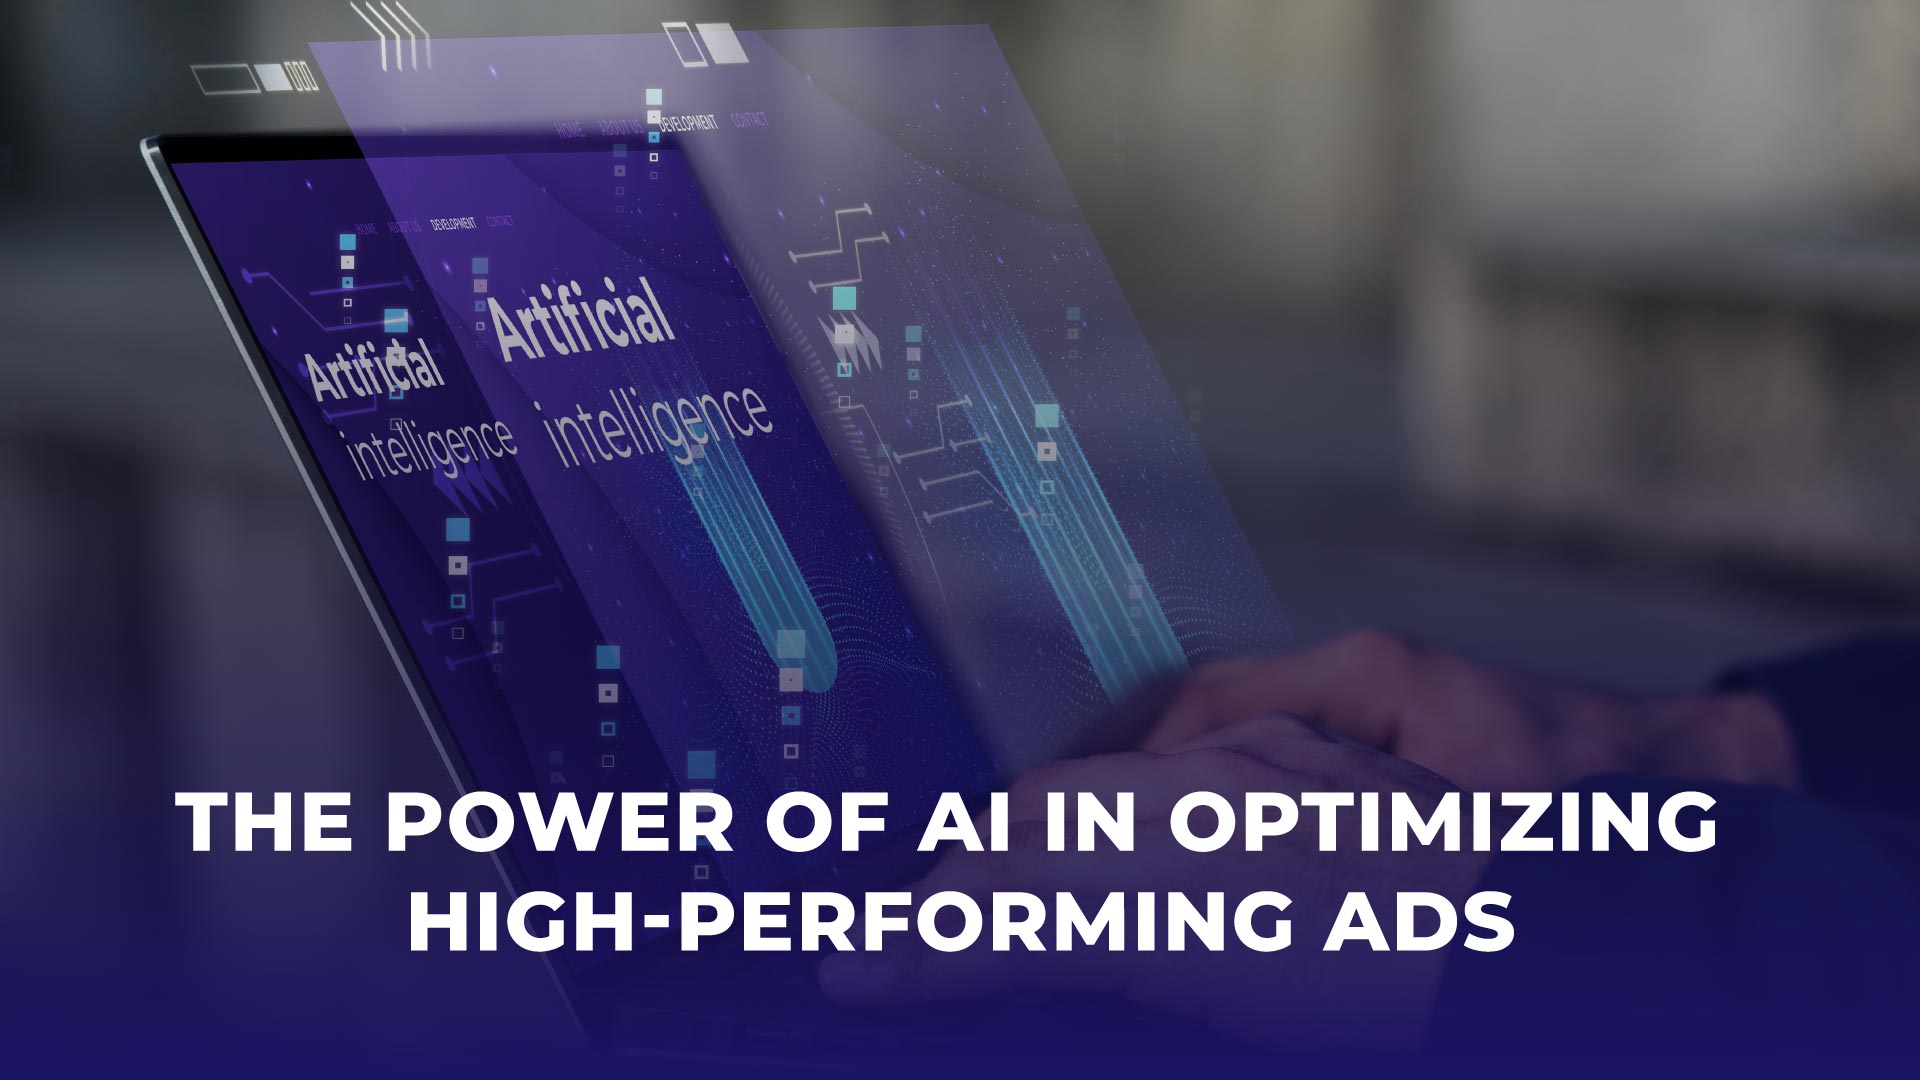 The Power of AI in Optimizing High-Performing Ads